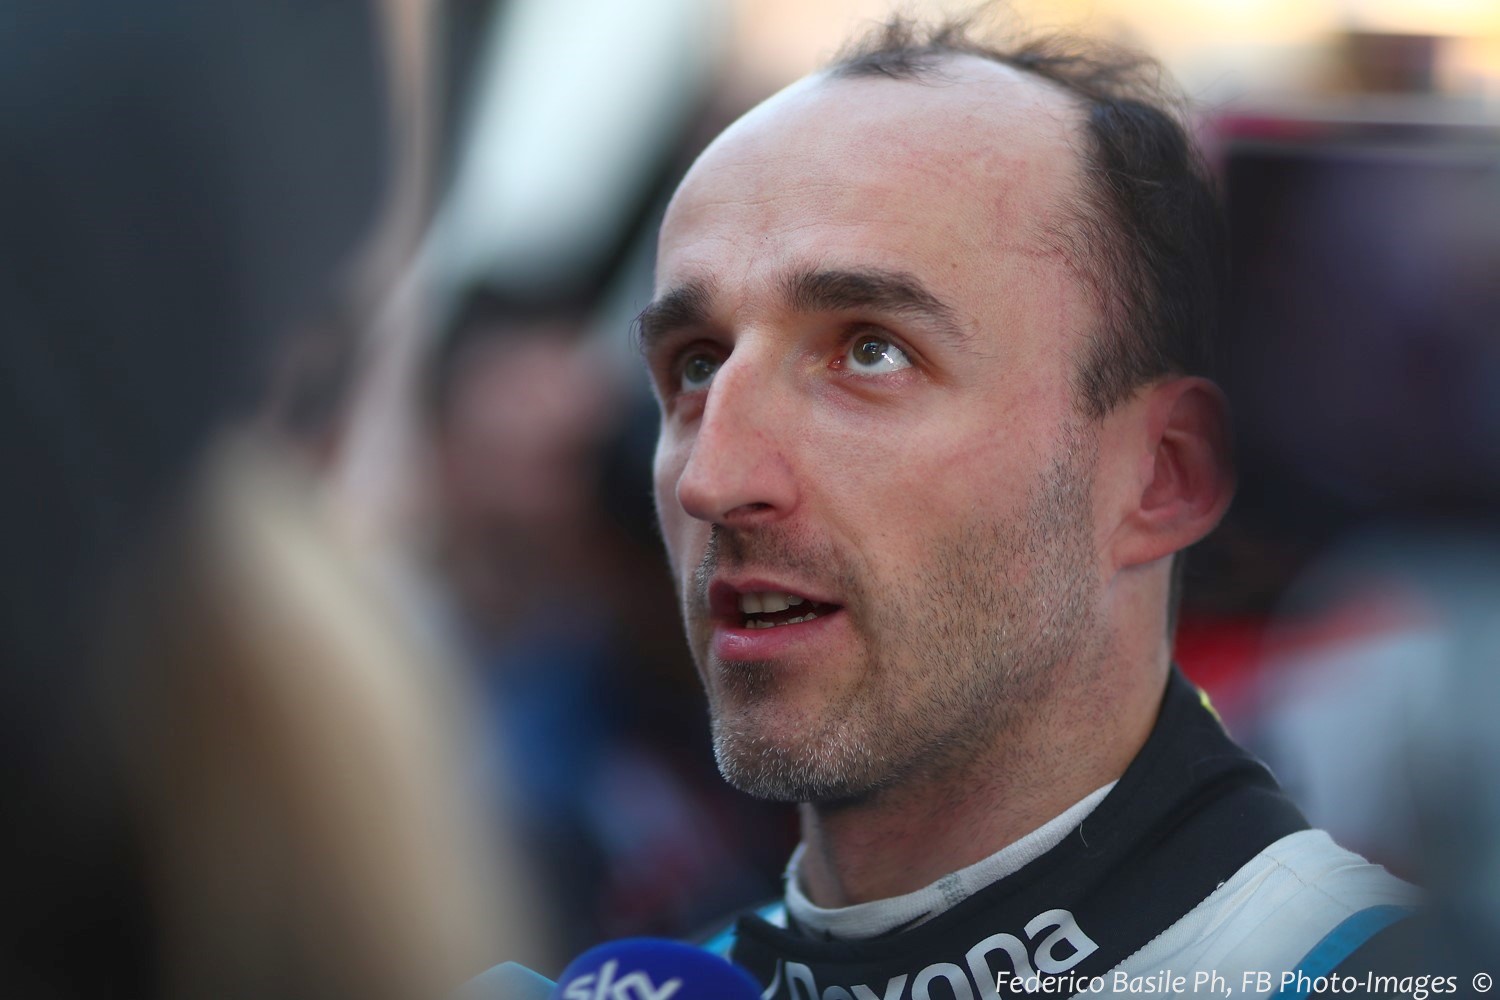 Kubica plays down fan abuse